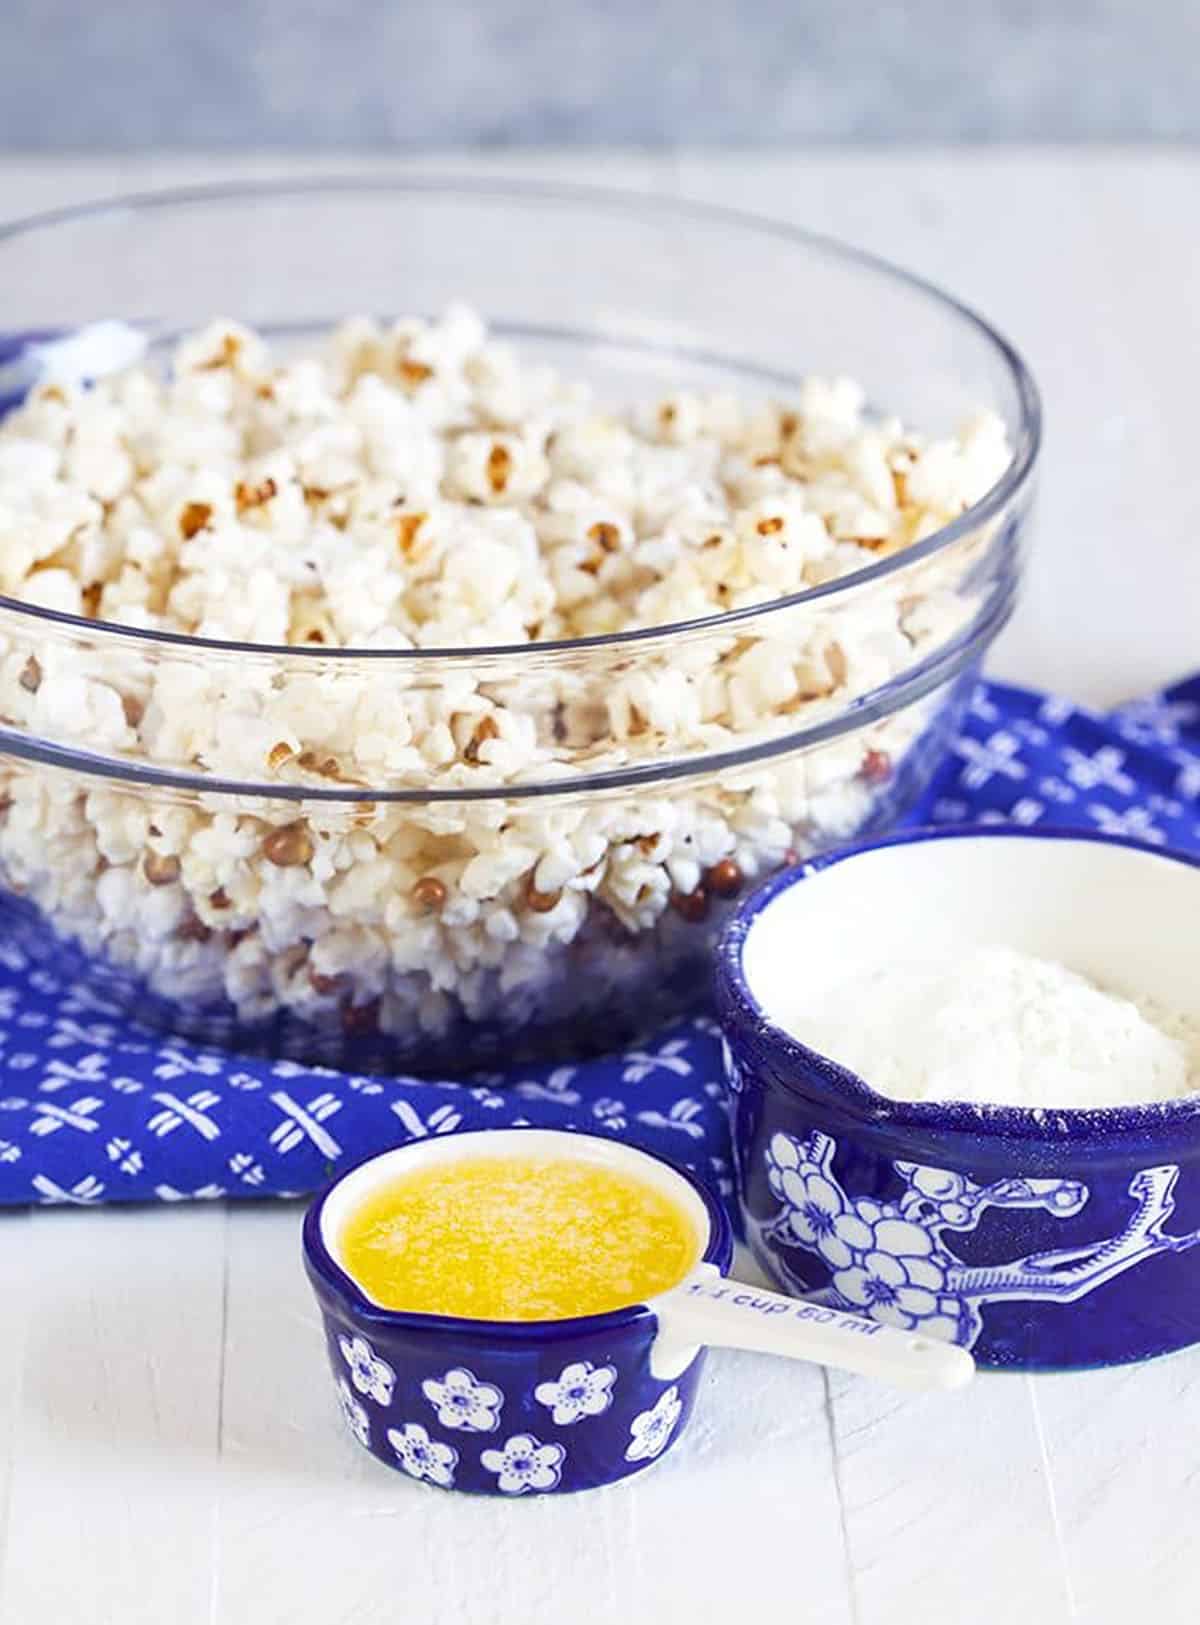 White cheddar popcorn in a red bowl on a blue napkin.